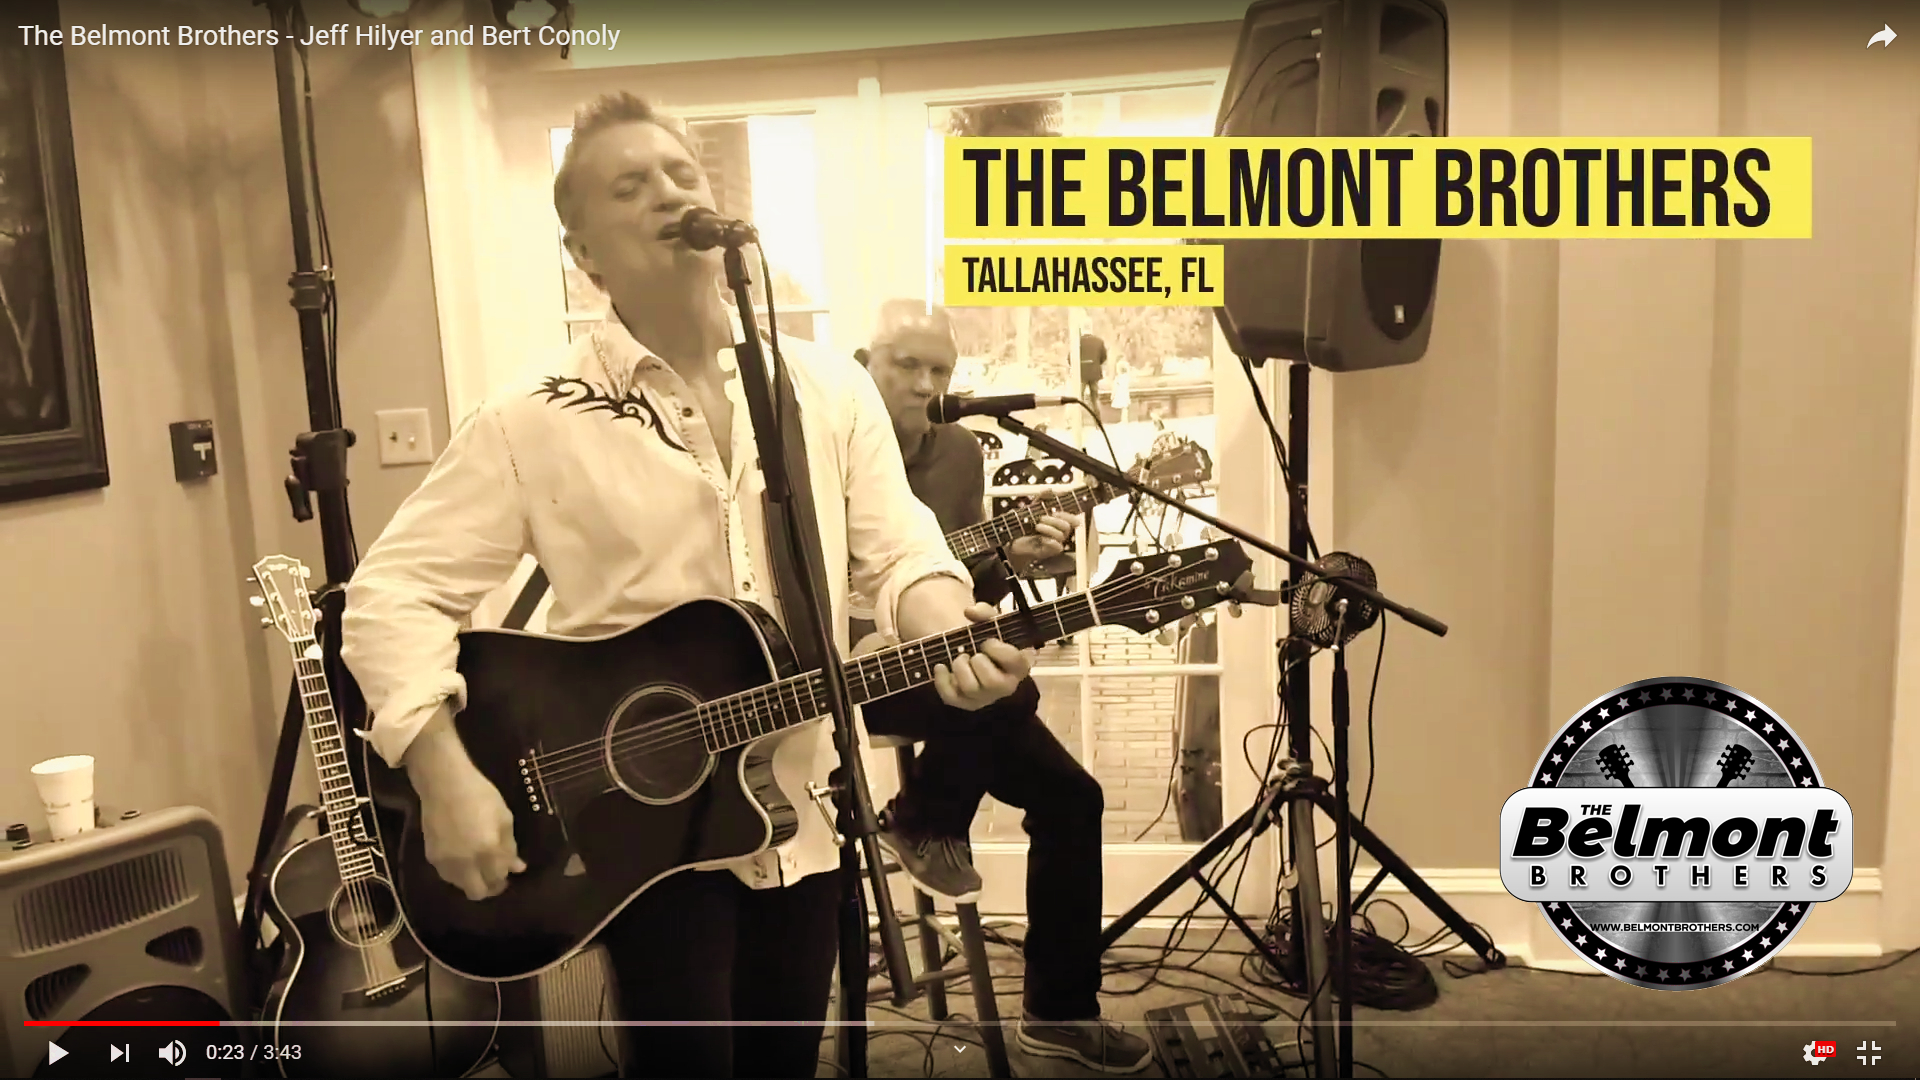 Jeff Hilyer & Bert Conoly - The Belmont Brothers